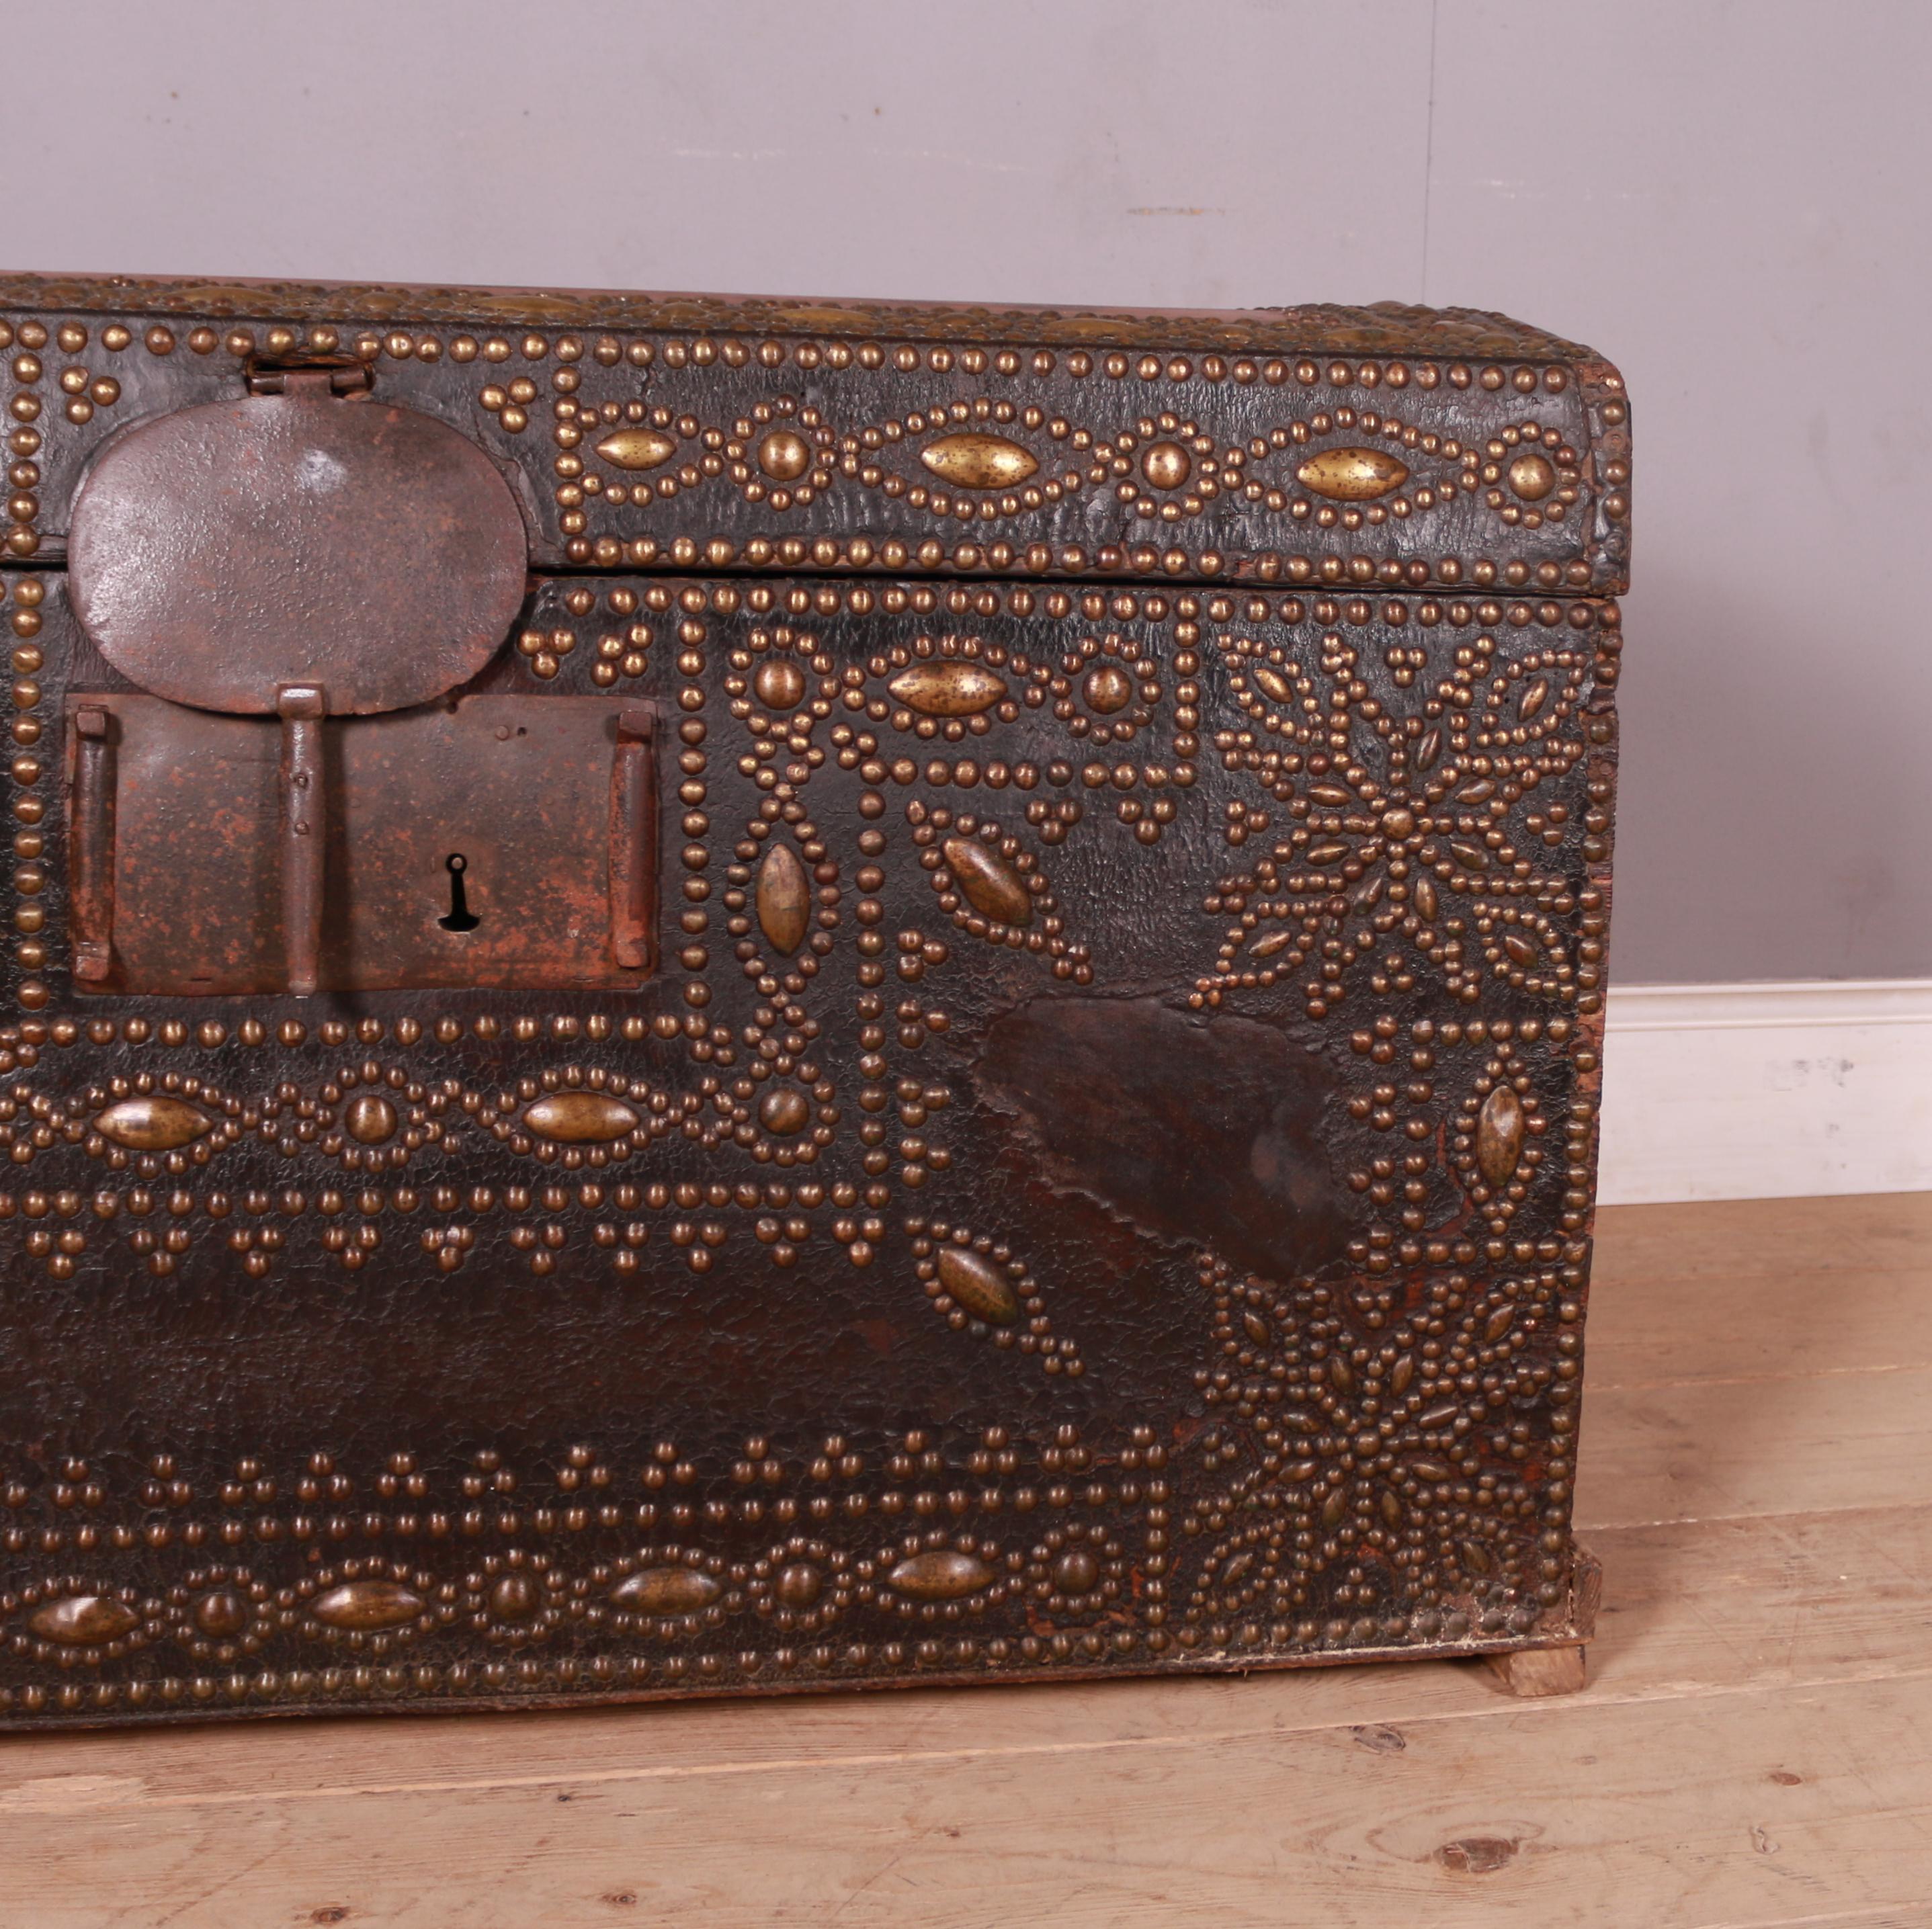 Studded Leather Travel Chest In Good Condition For Sale In Leamington Spa, Warwickshire